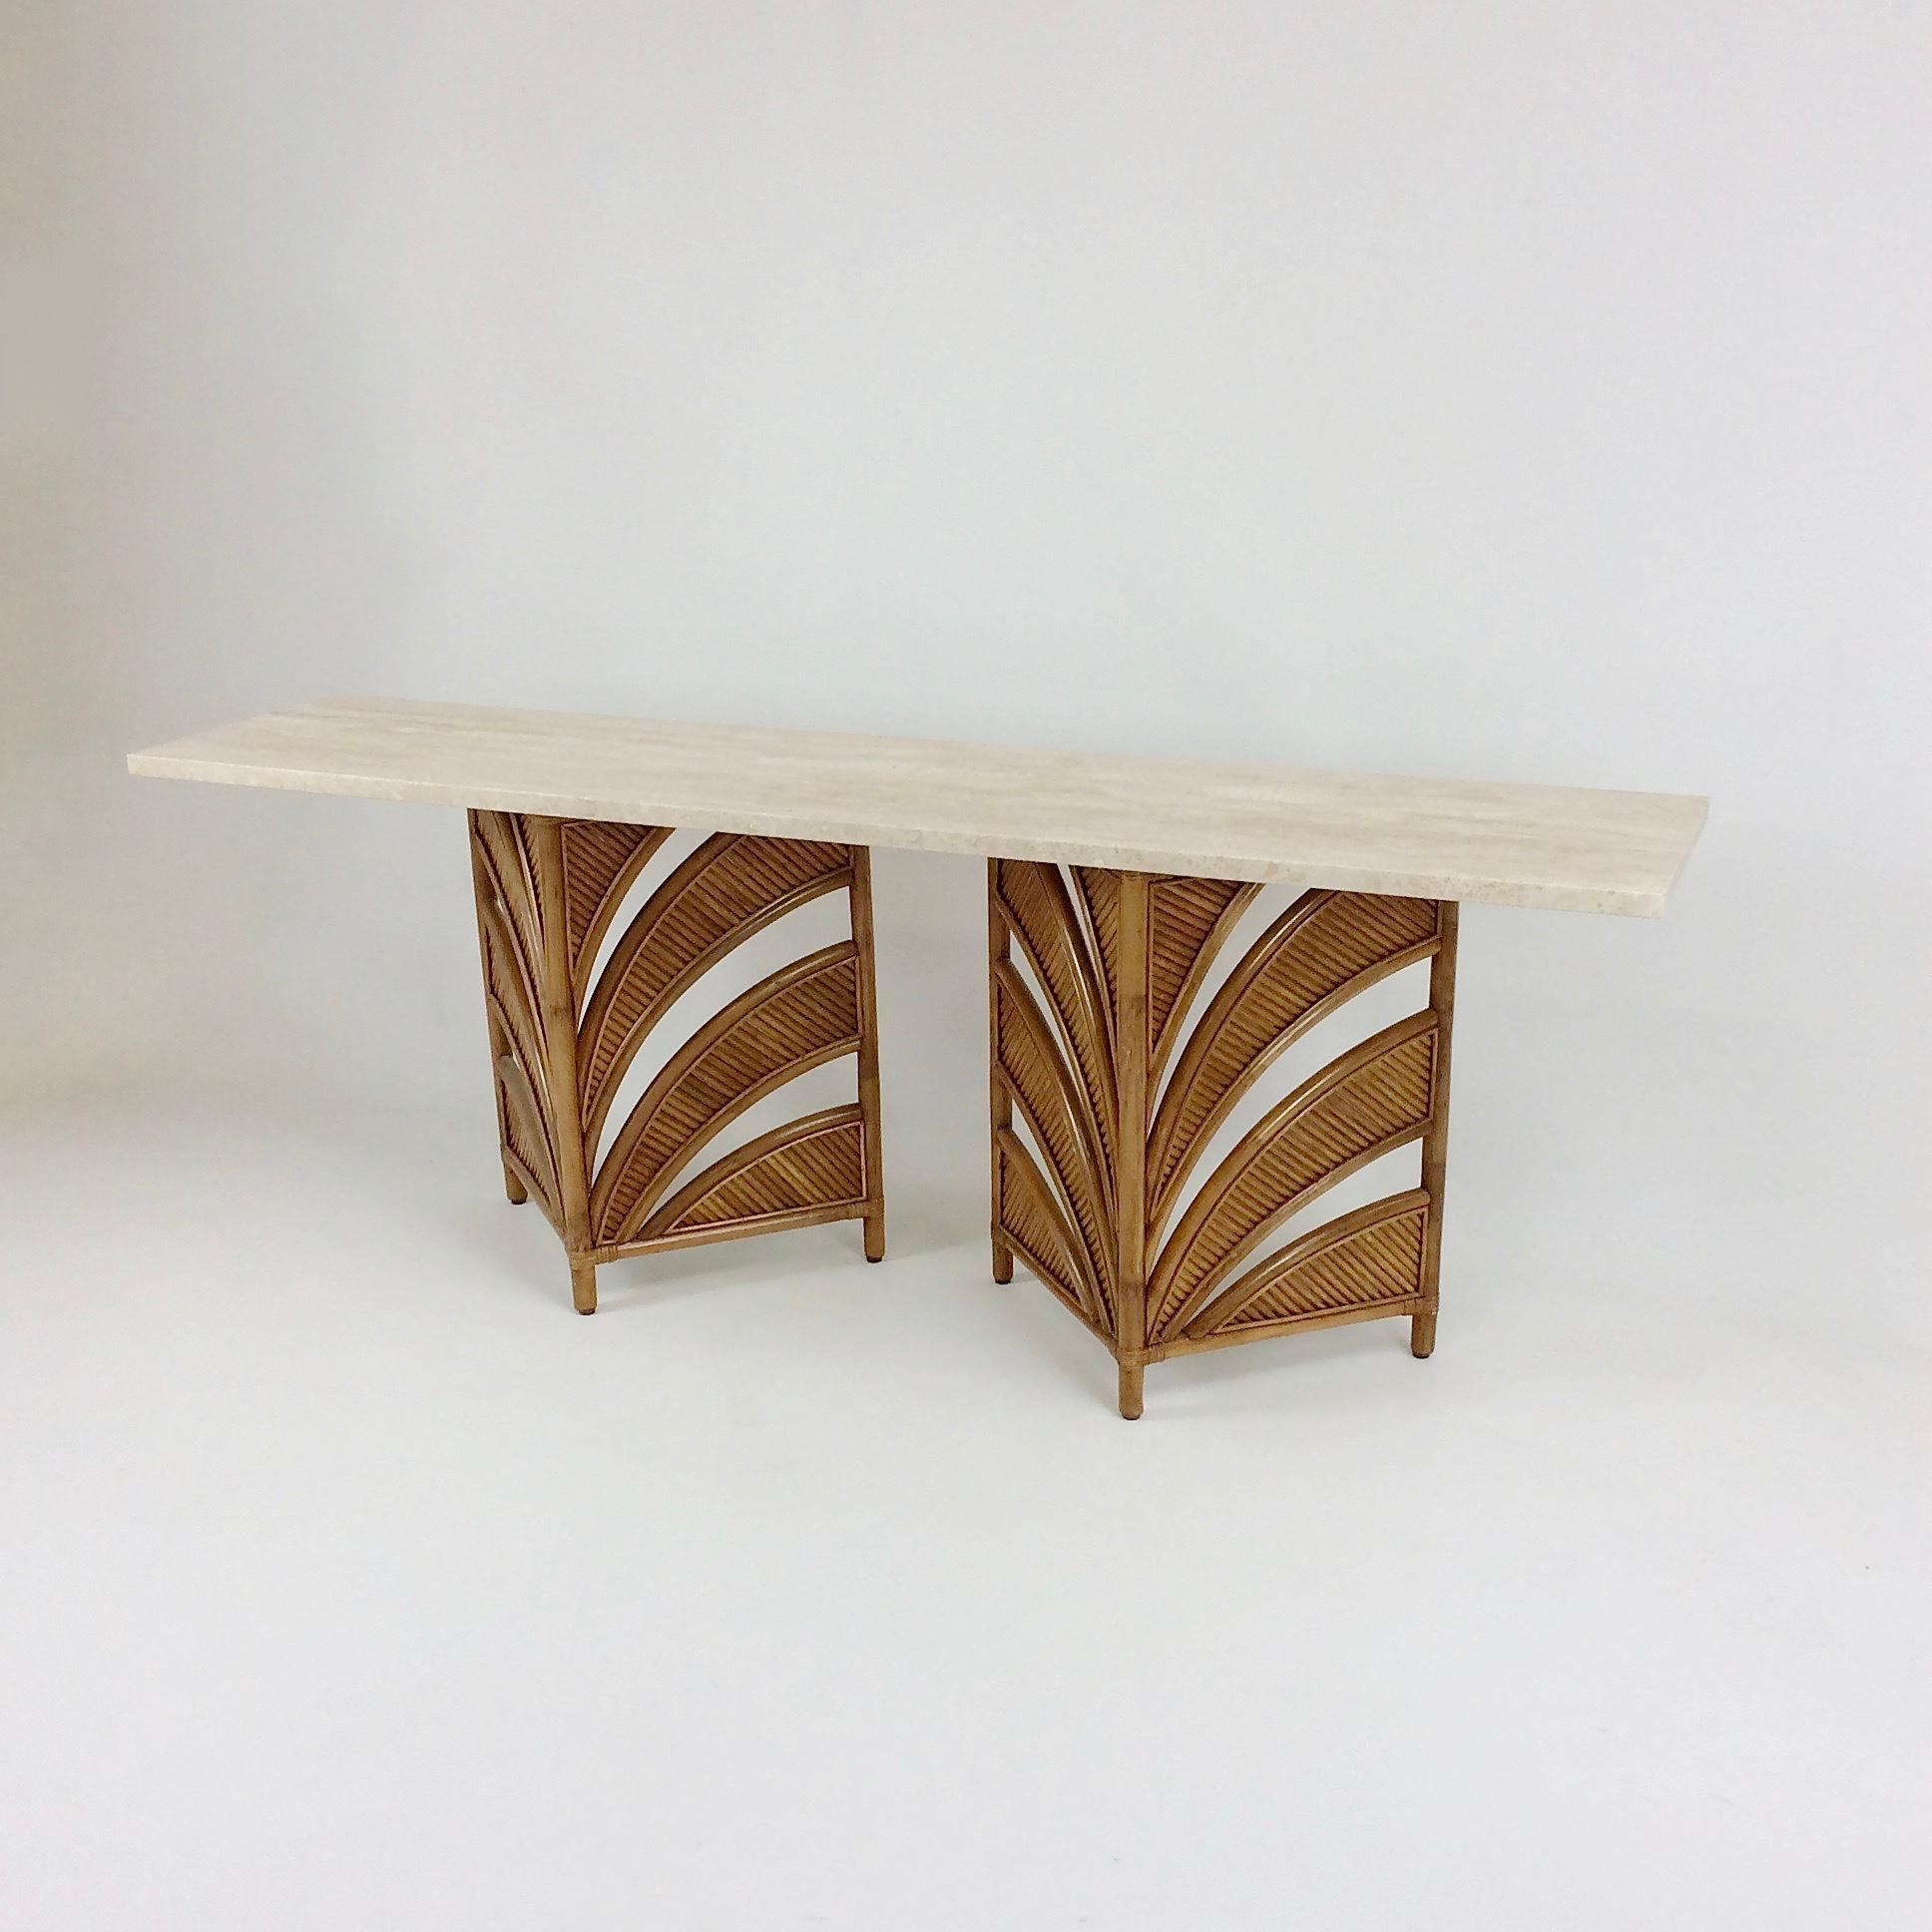 Elegant large console, design attributed to Vivai Del Sud, circa 1970, Italy.
Two independent bamboo and rattan feet, travertine top.
Dimensions: 200 cm W, 45 cm D, 75 cm H.
Good original condition.
All purchases are covered by our Buyer